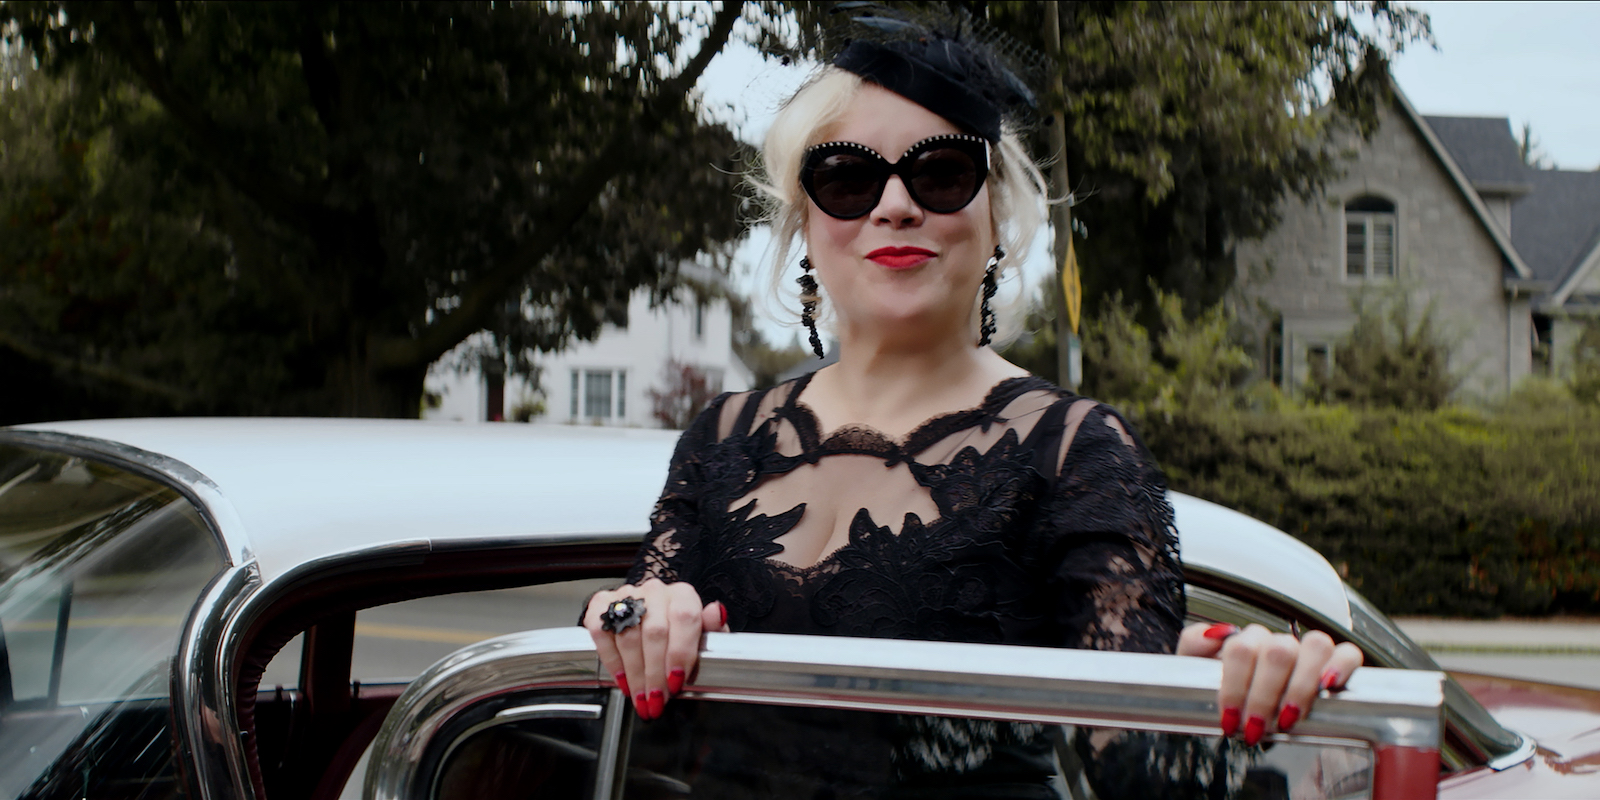 Jennifer Tilly exits a white car wearing a black dress and sunglasses